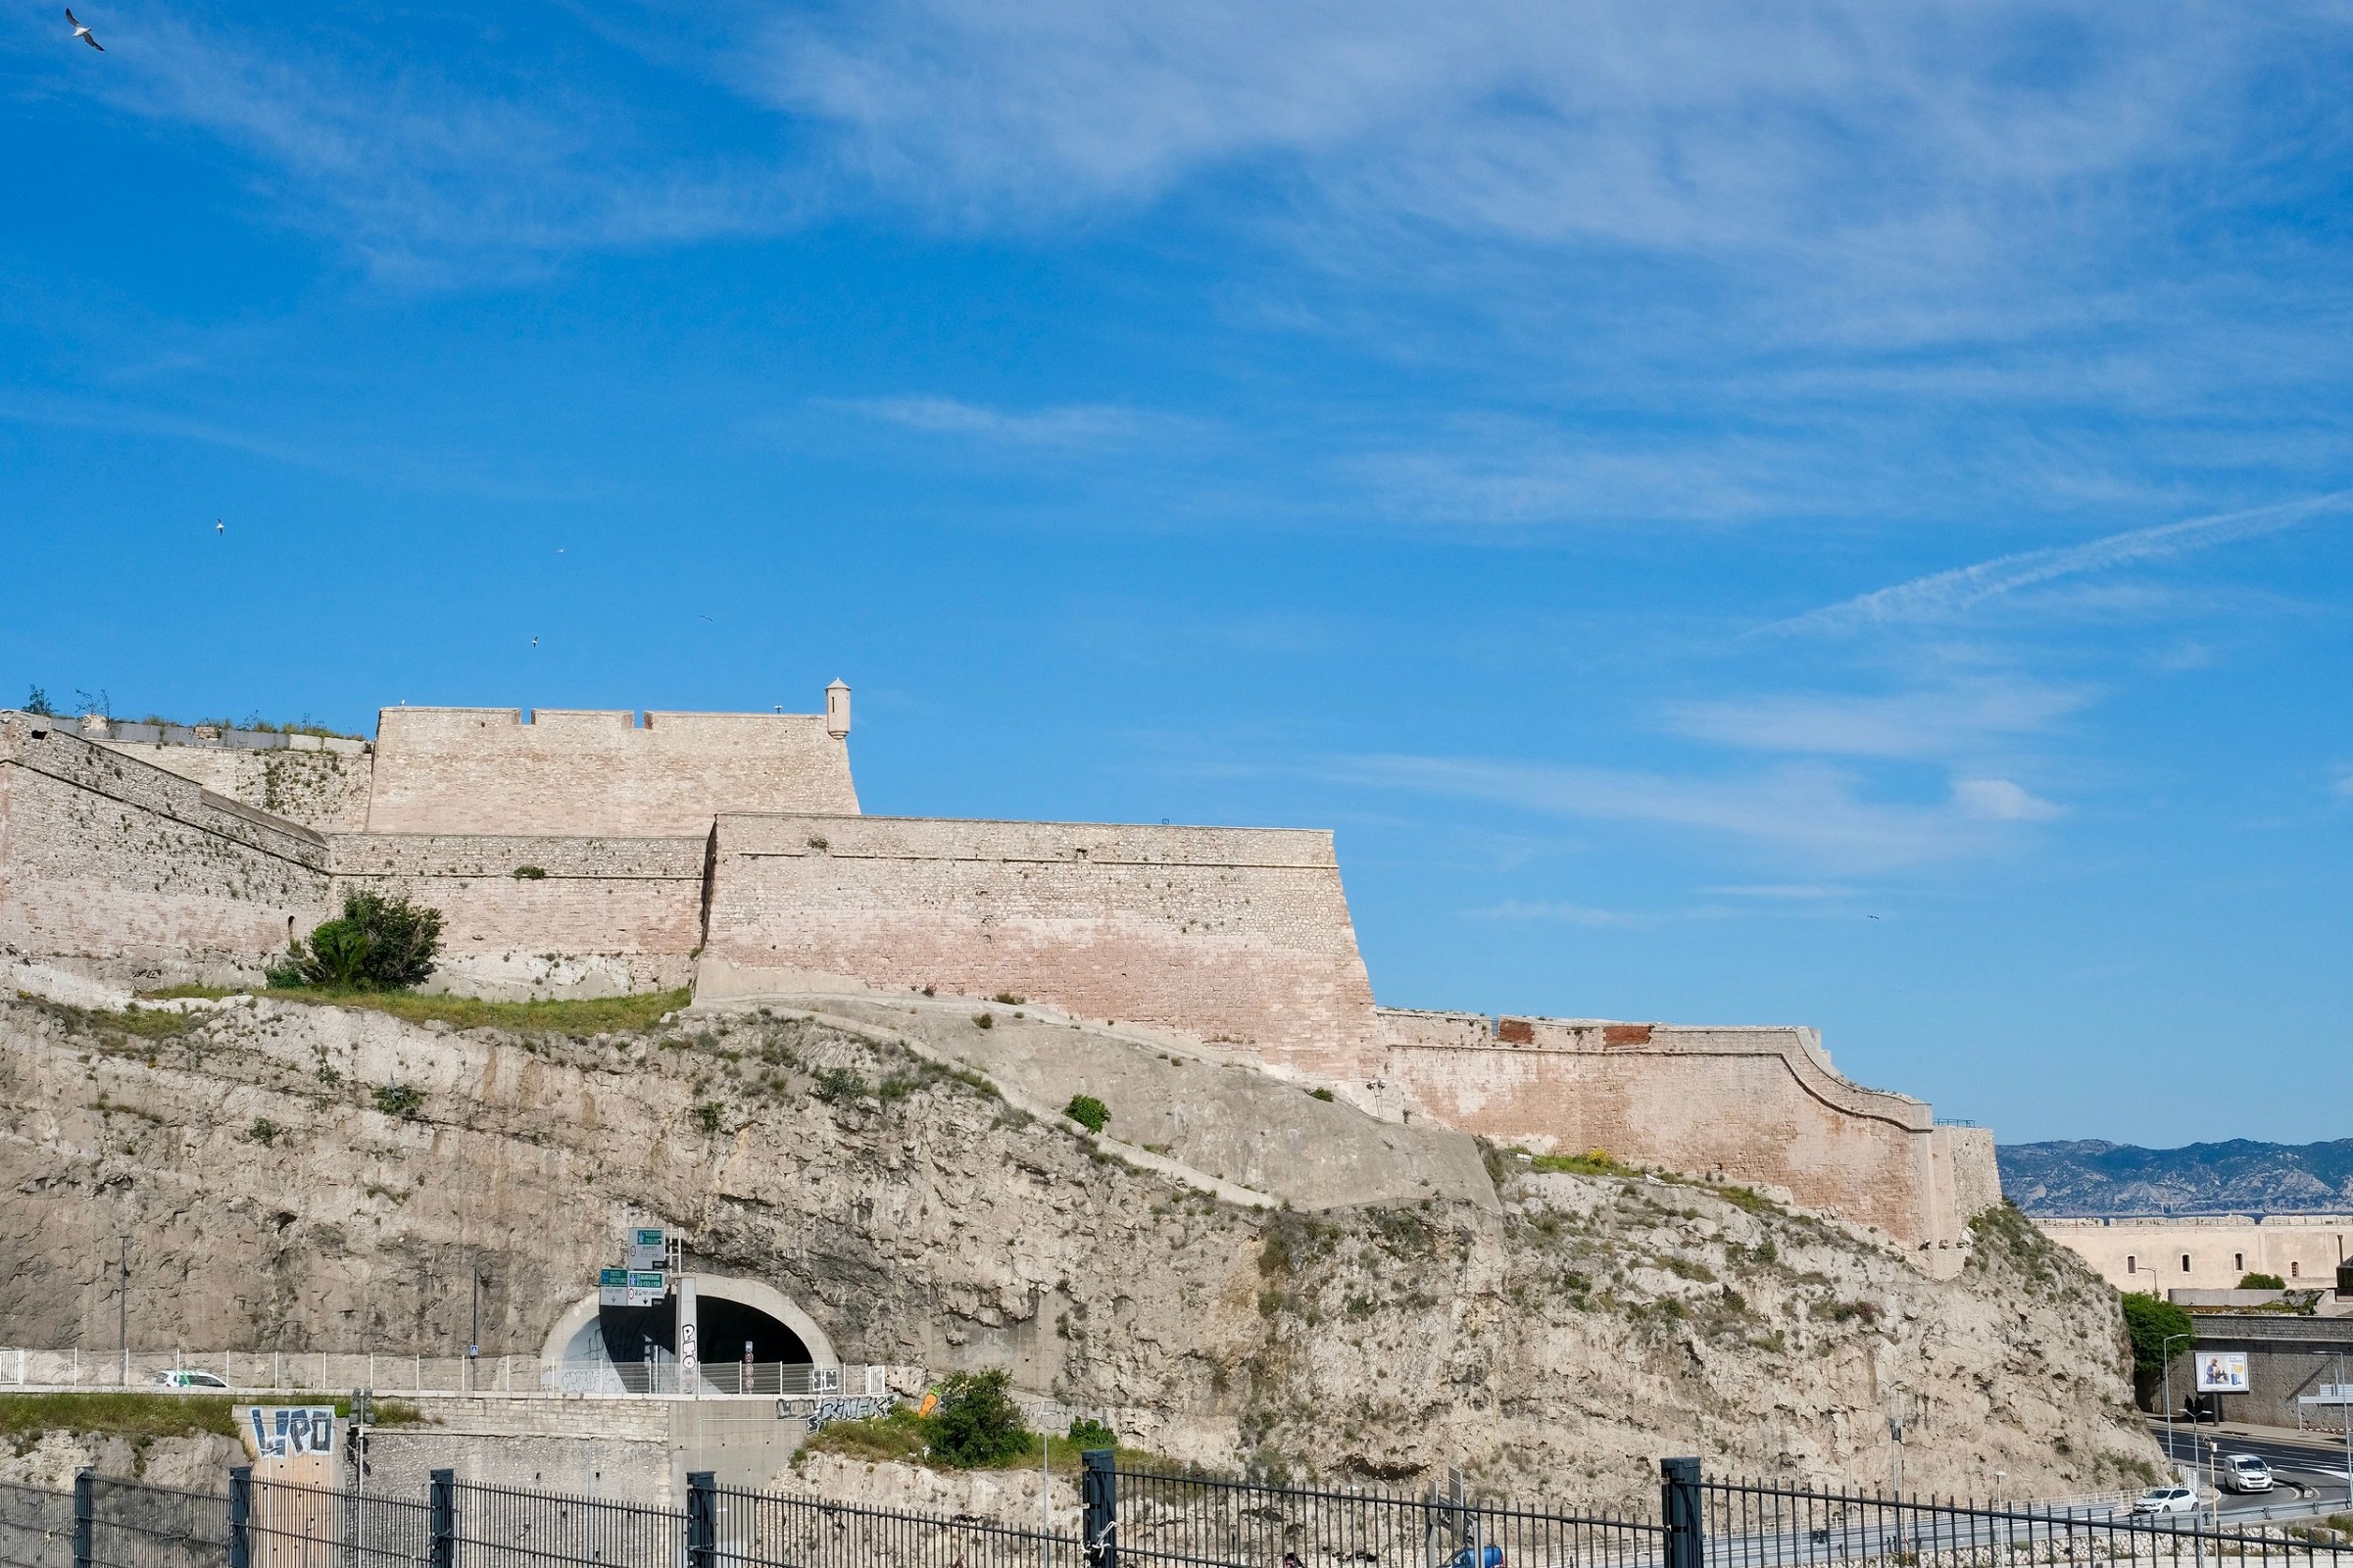 Marseille’s Fort Saint-Nicolas opens to the public for the first time in 360 years